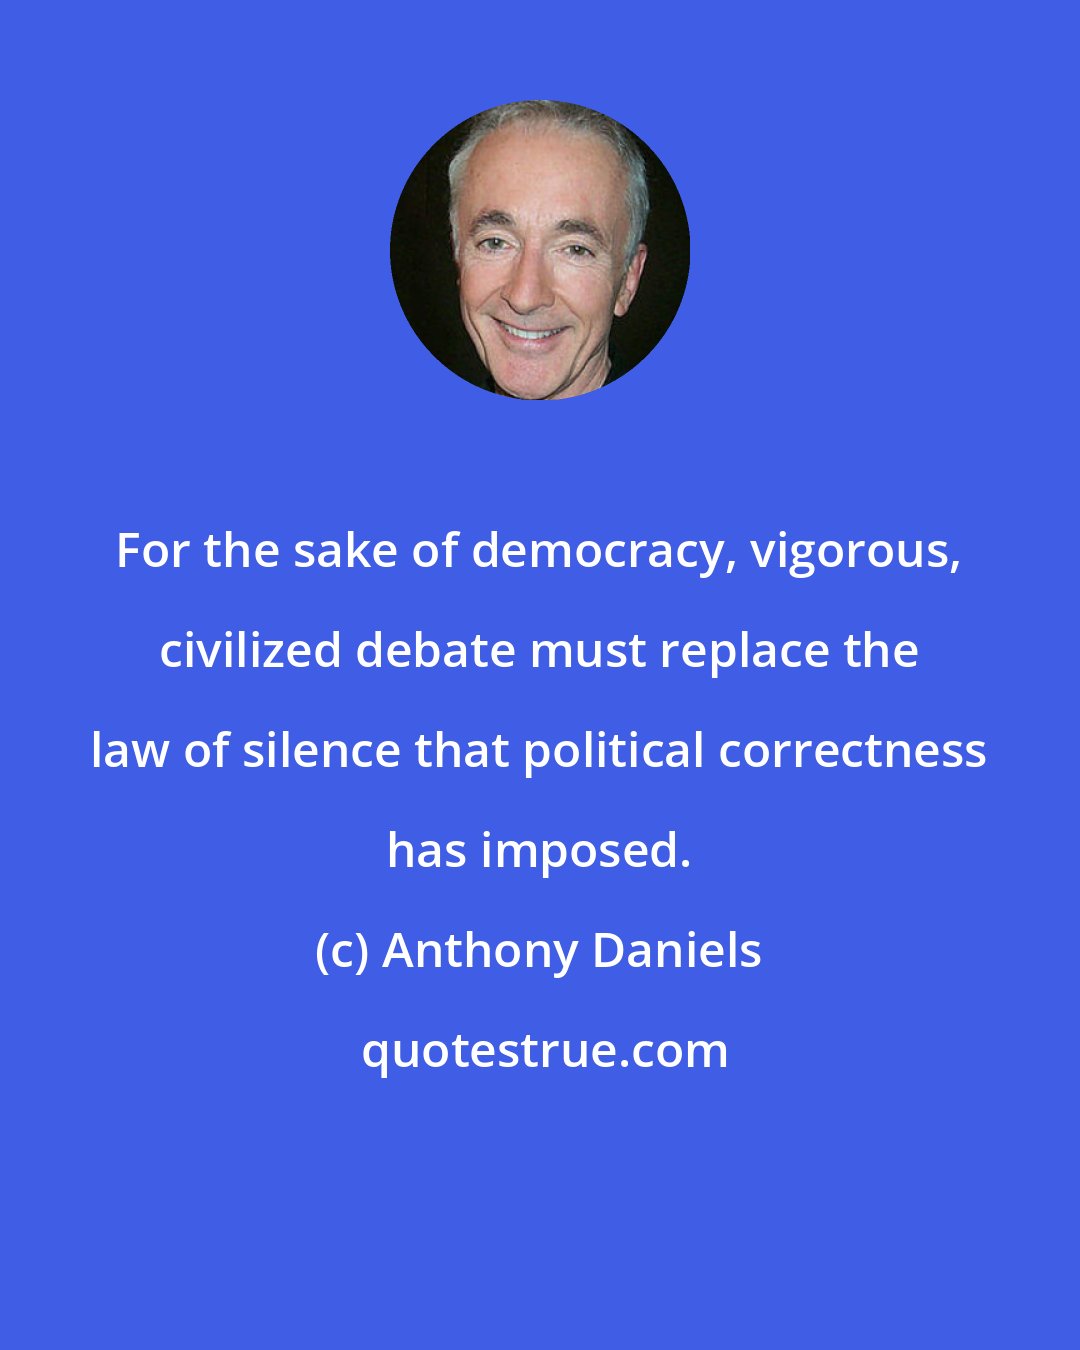 Anthony Daniels: For the sake of democracy, vigorous, civilized debate must replace the law of silence that political correctness has imposed.